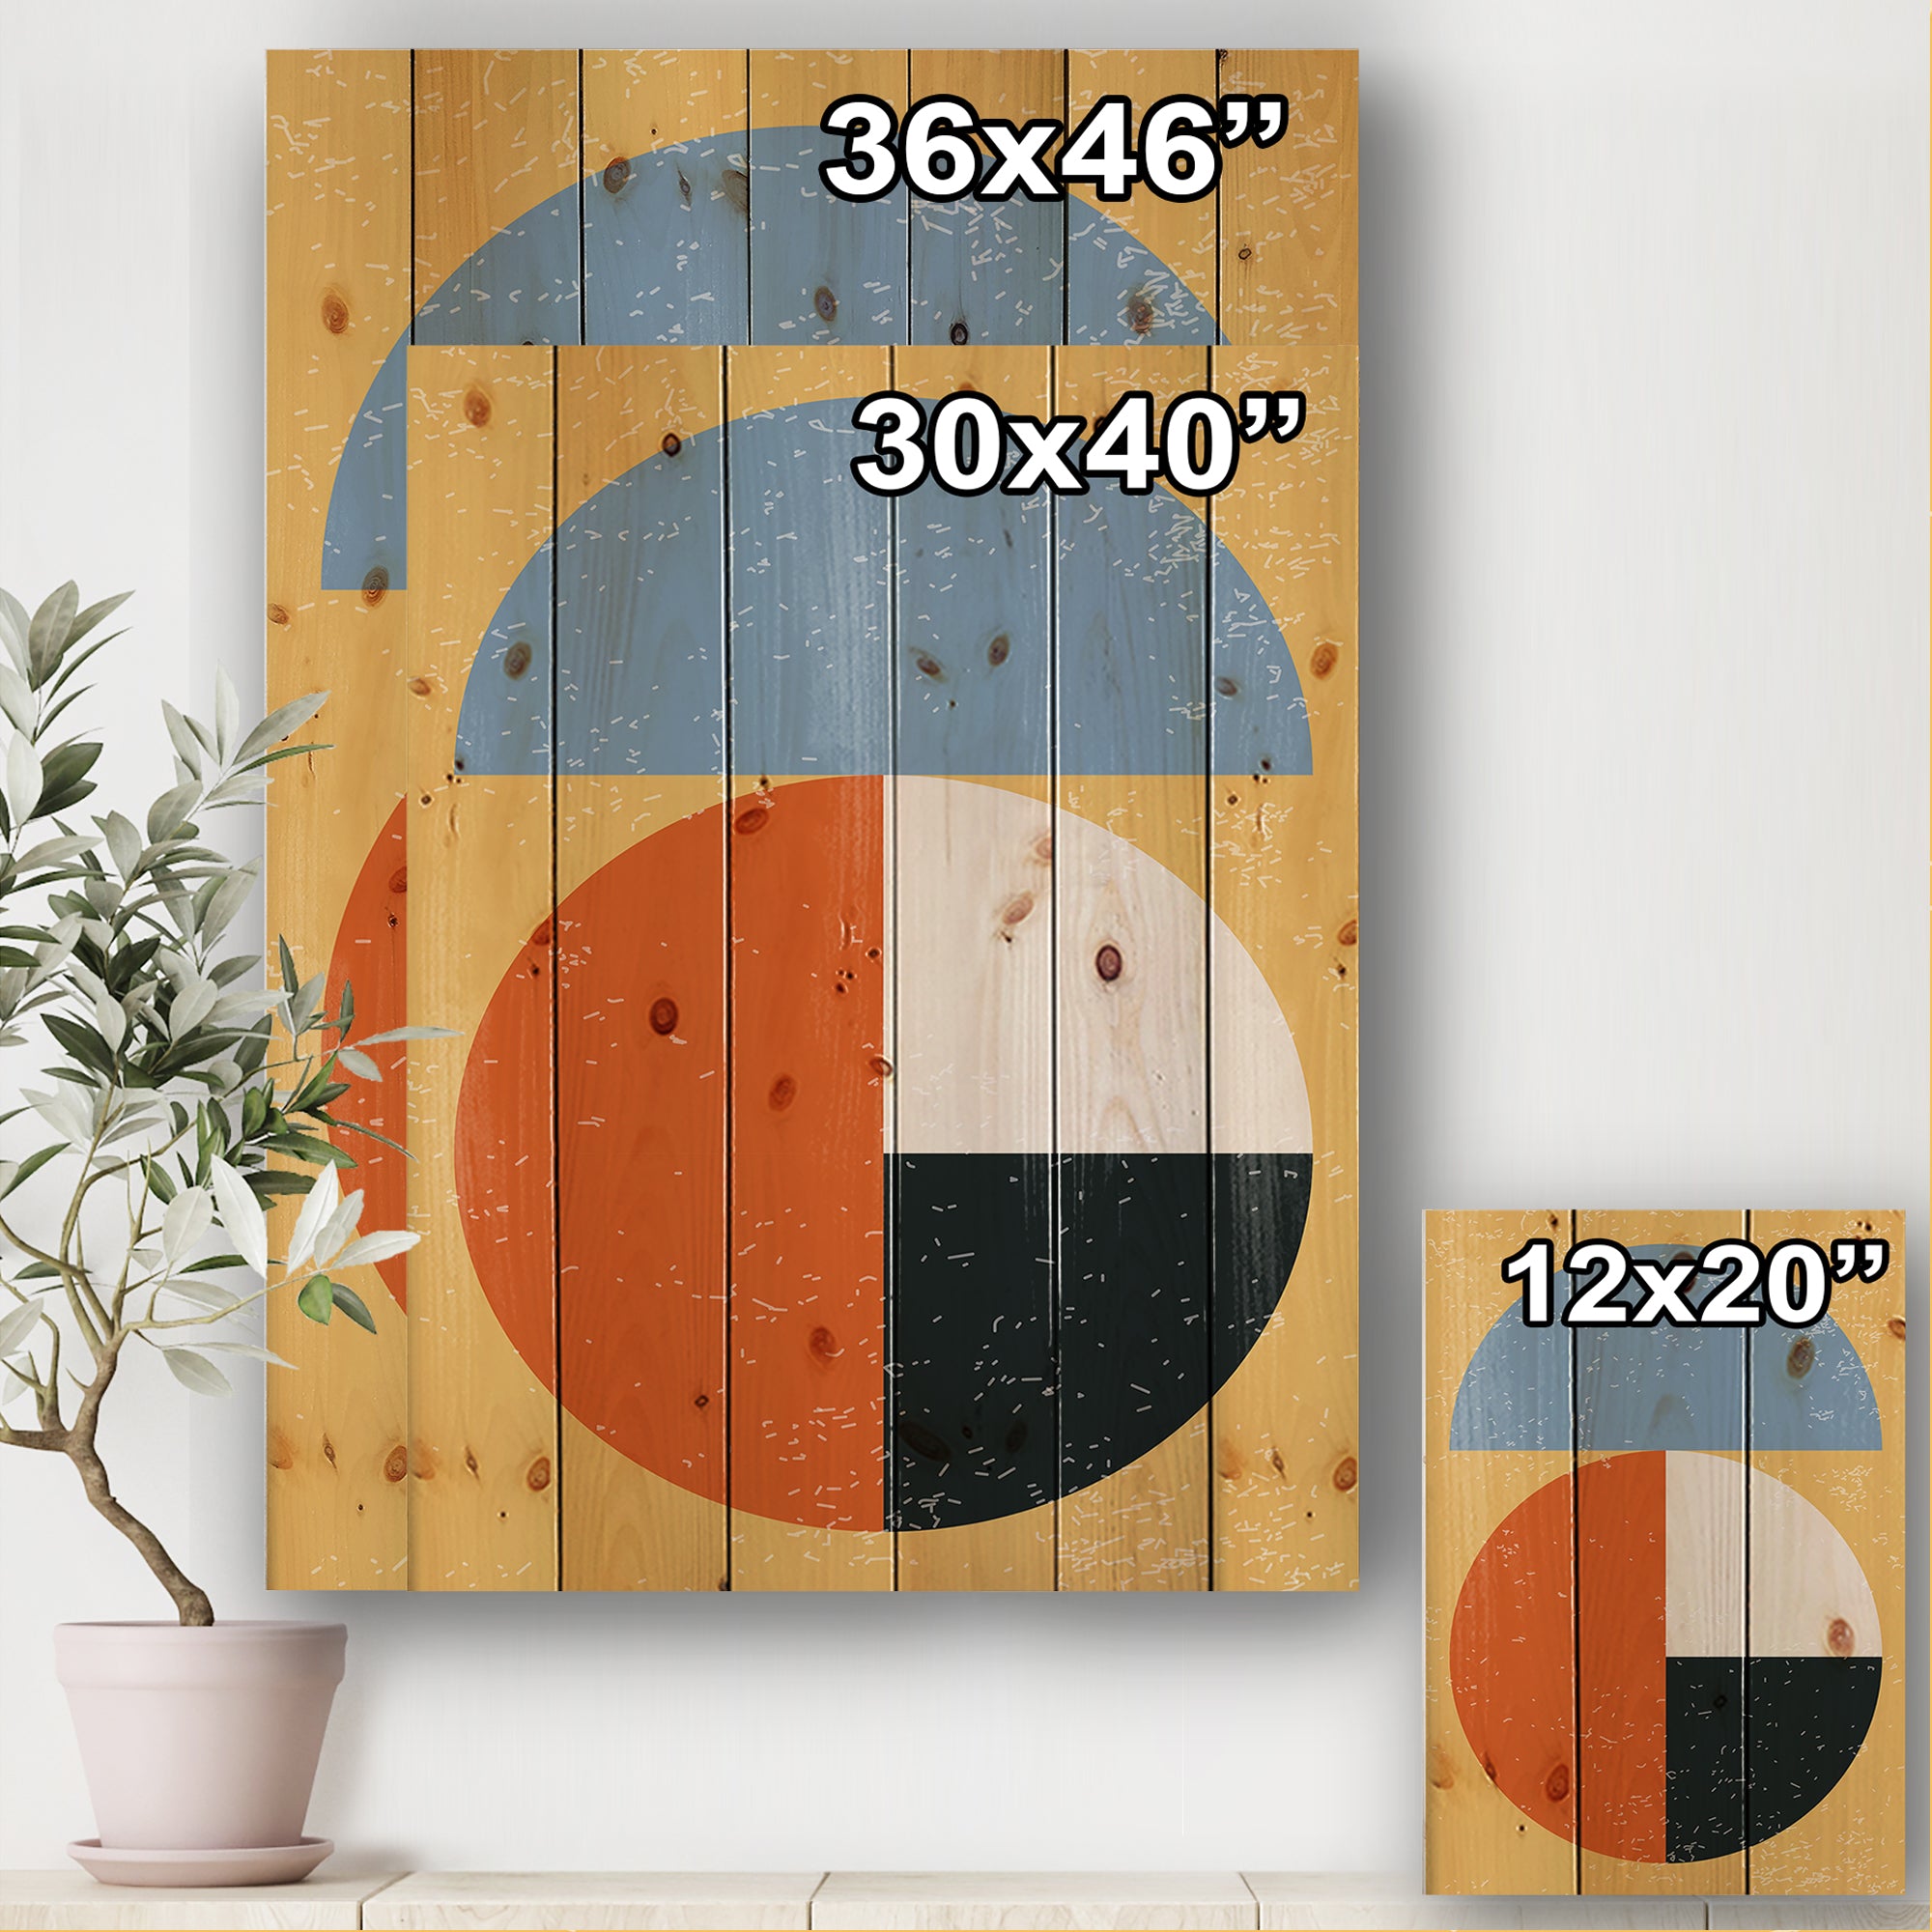 Minimal Geometric Compostions Of Elementary Forms XXVIII - Modern Print on Natural Pine Wood